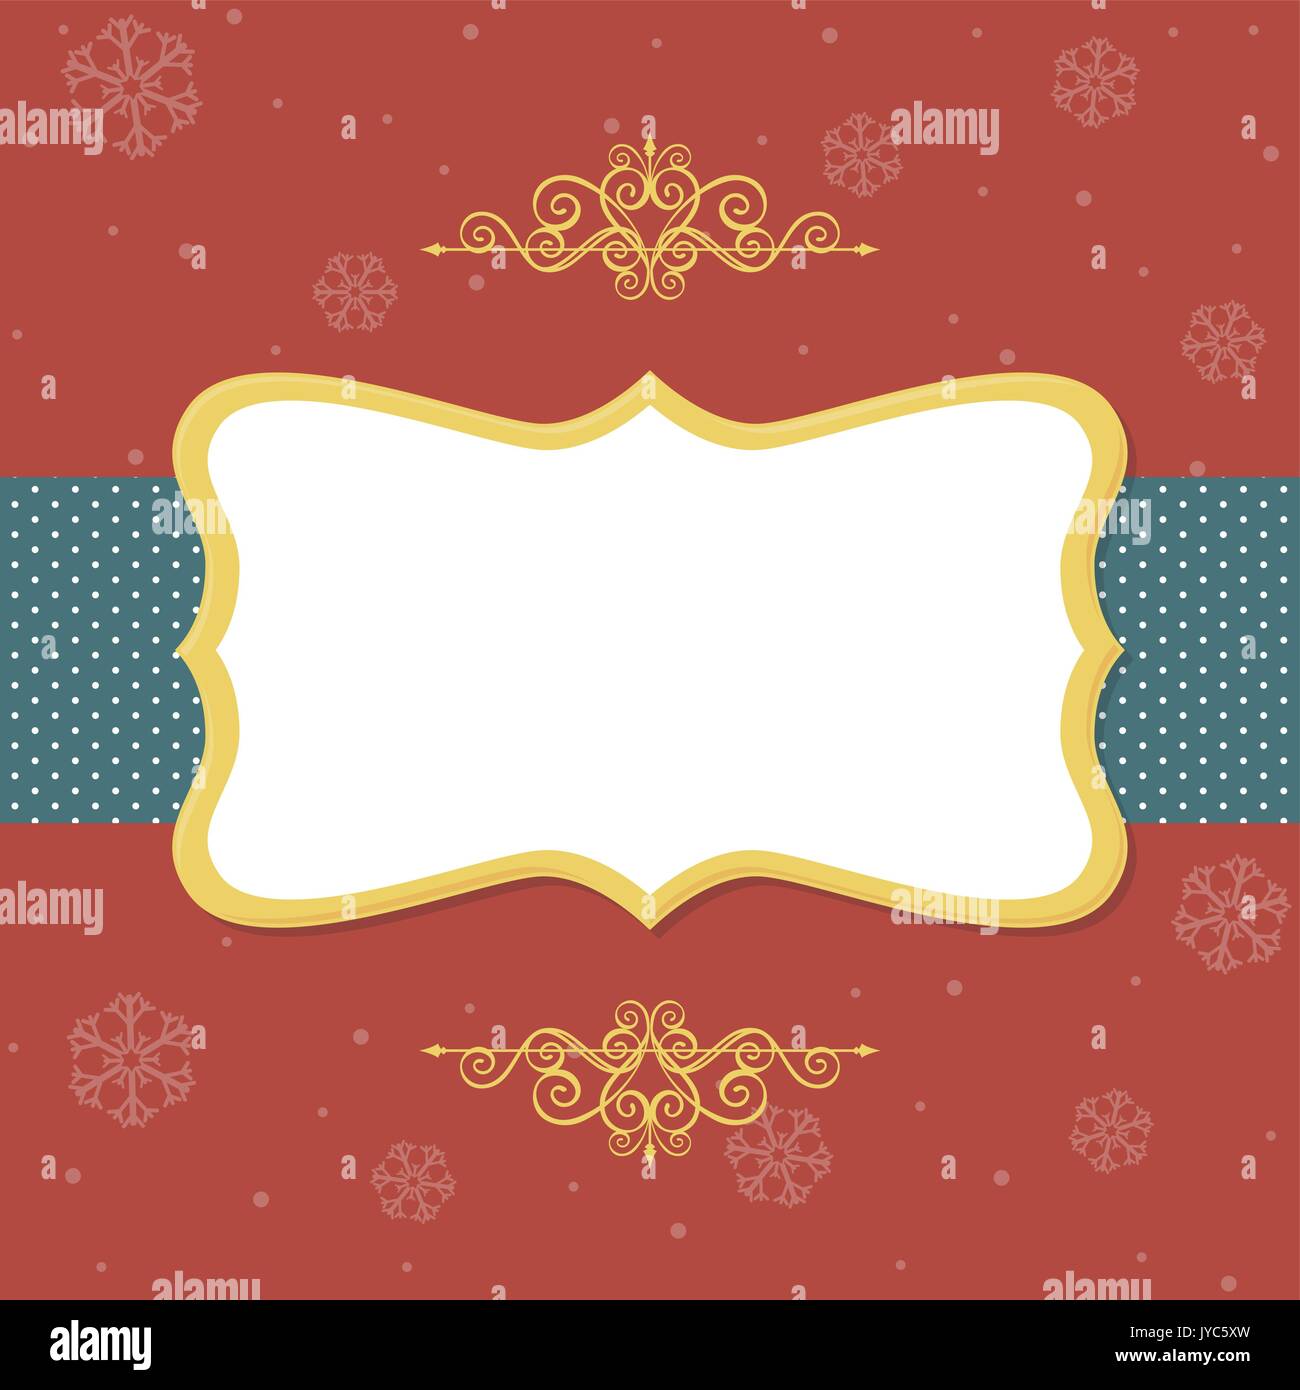 frame with ornaments on red background with snowflakes Stock Vector